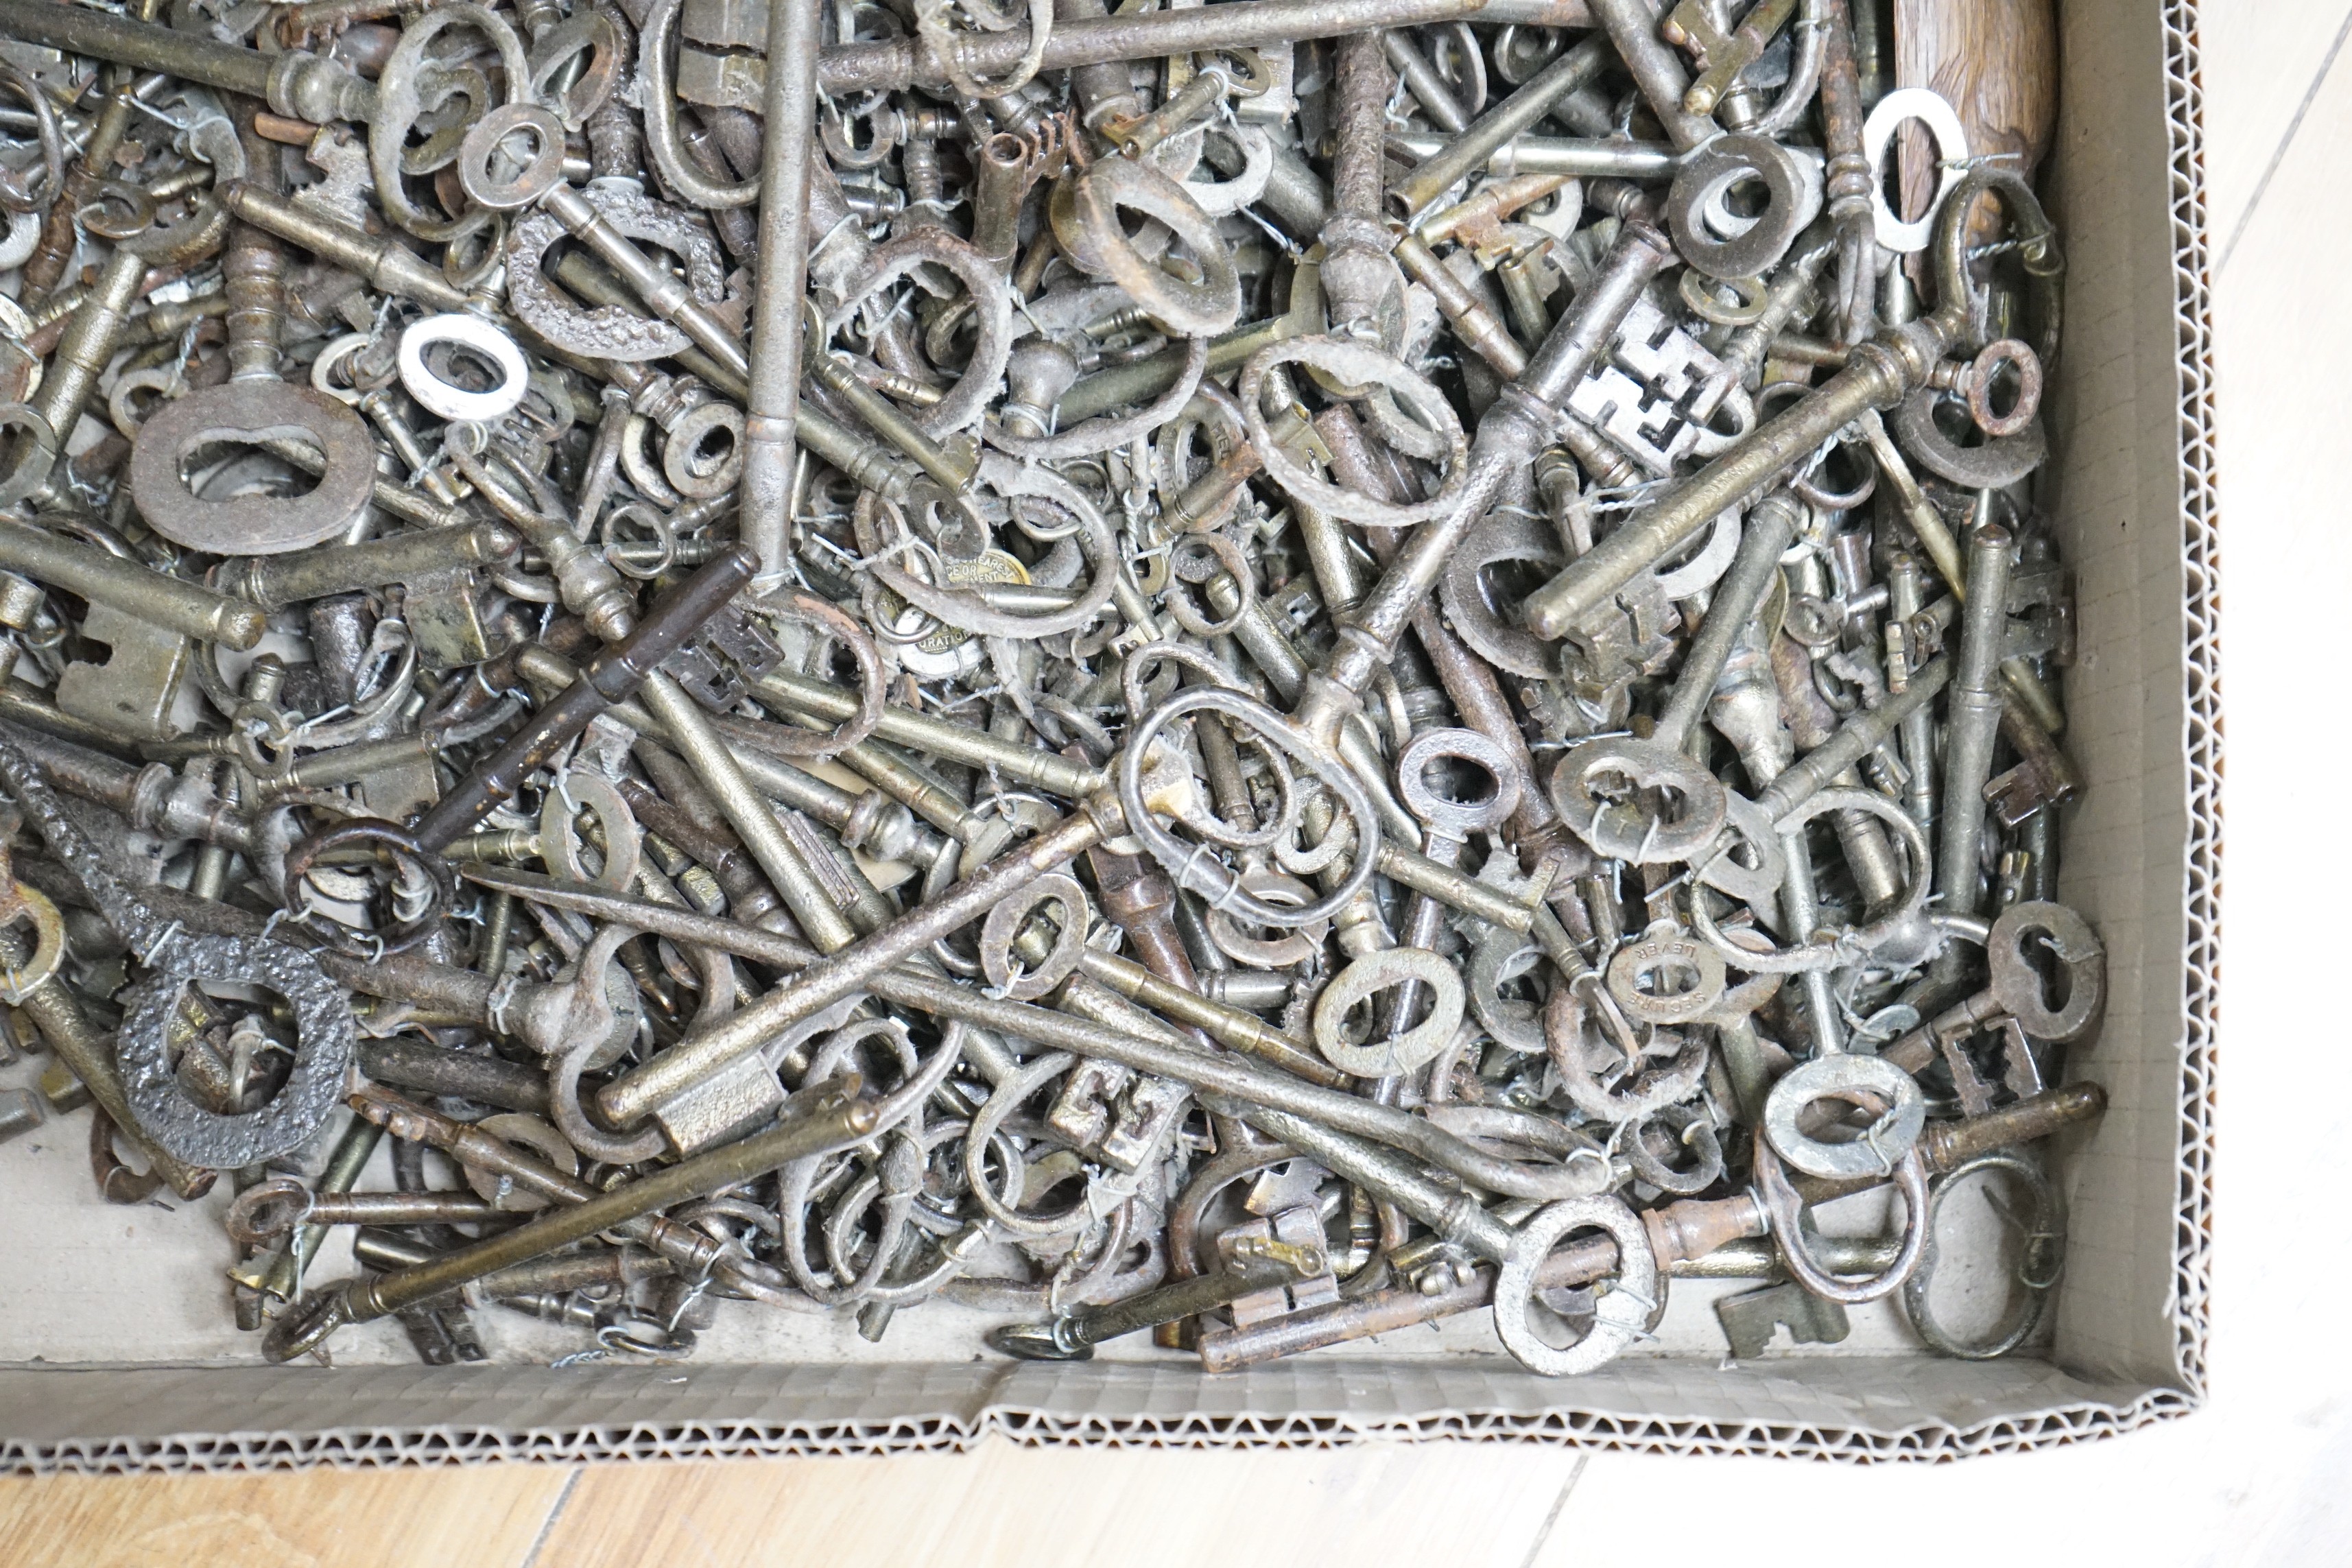 A large collection of antique keys